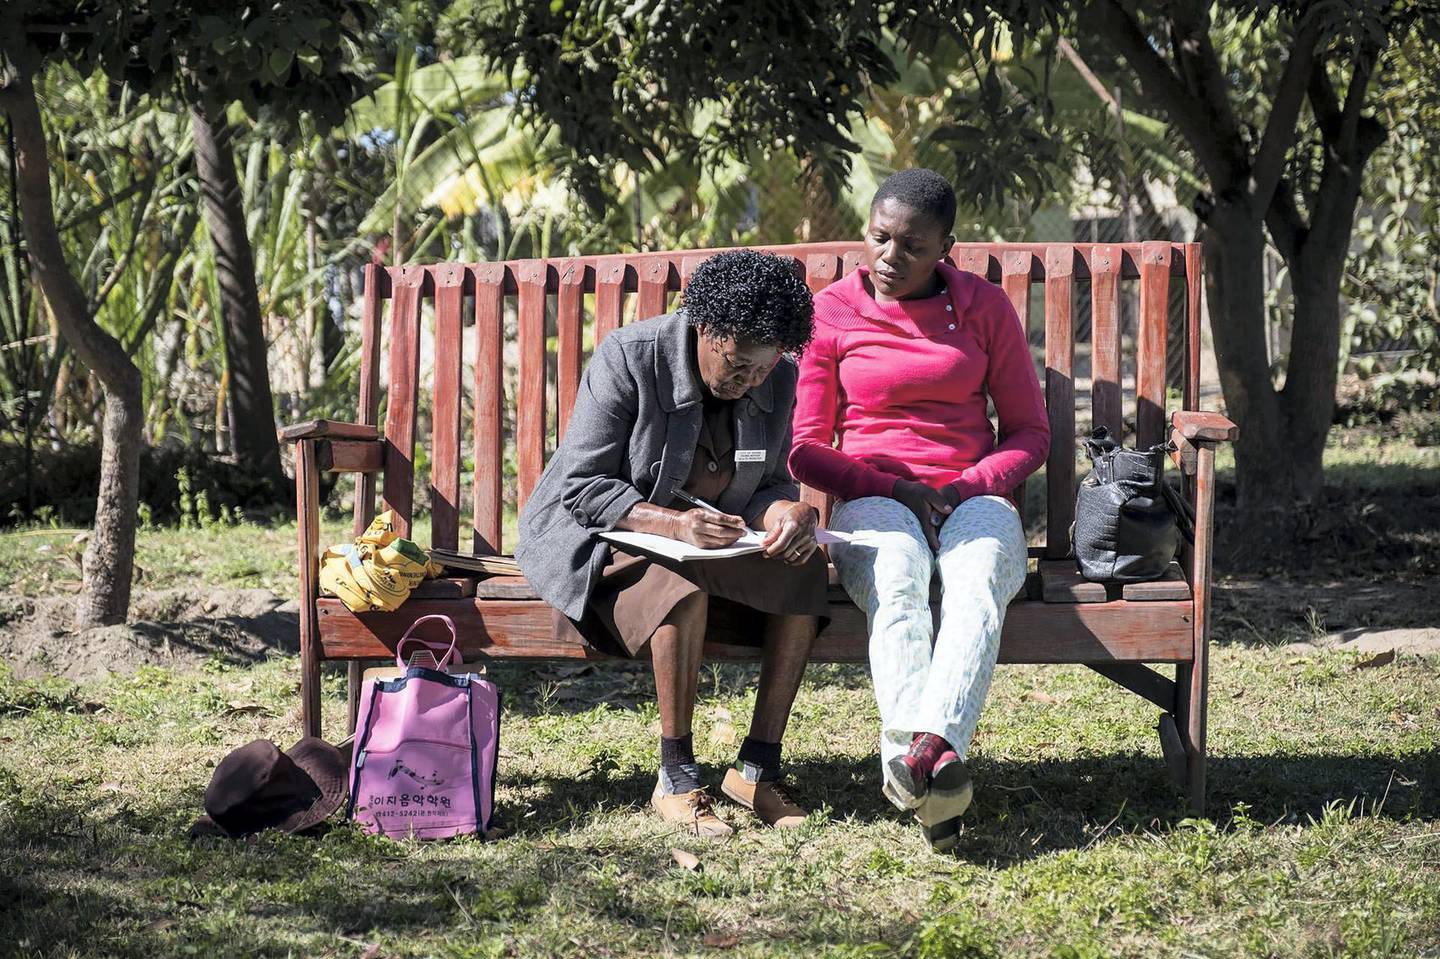 The Zimbabwean initiative has spawned 70 benches across the country and trained more than 400 lay health workers, known as 'community grandmothers'. These grandmothers lend a friendly ear to adults experiencing symptoms of depression and anxiety. They have so far helped more than 35,000 Zimbabweans. Facebook / @friendshipbenchzimbabwe